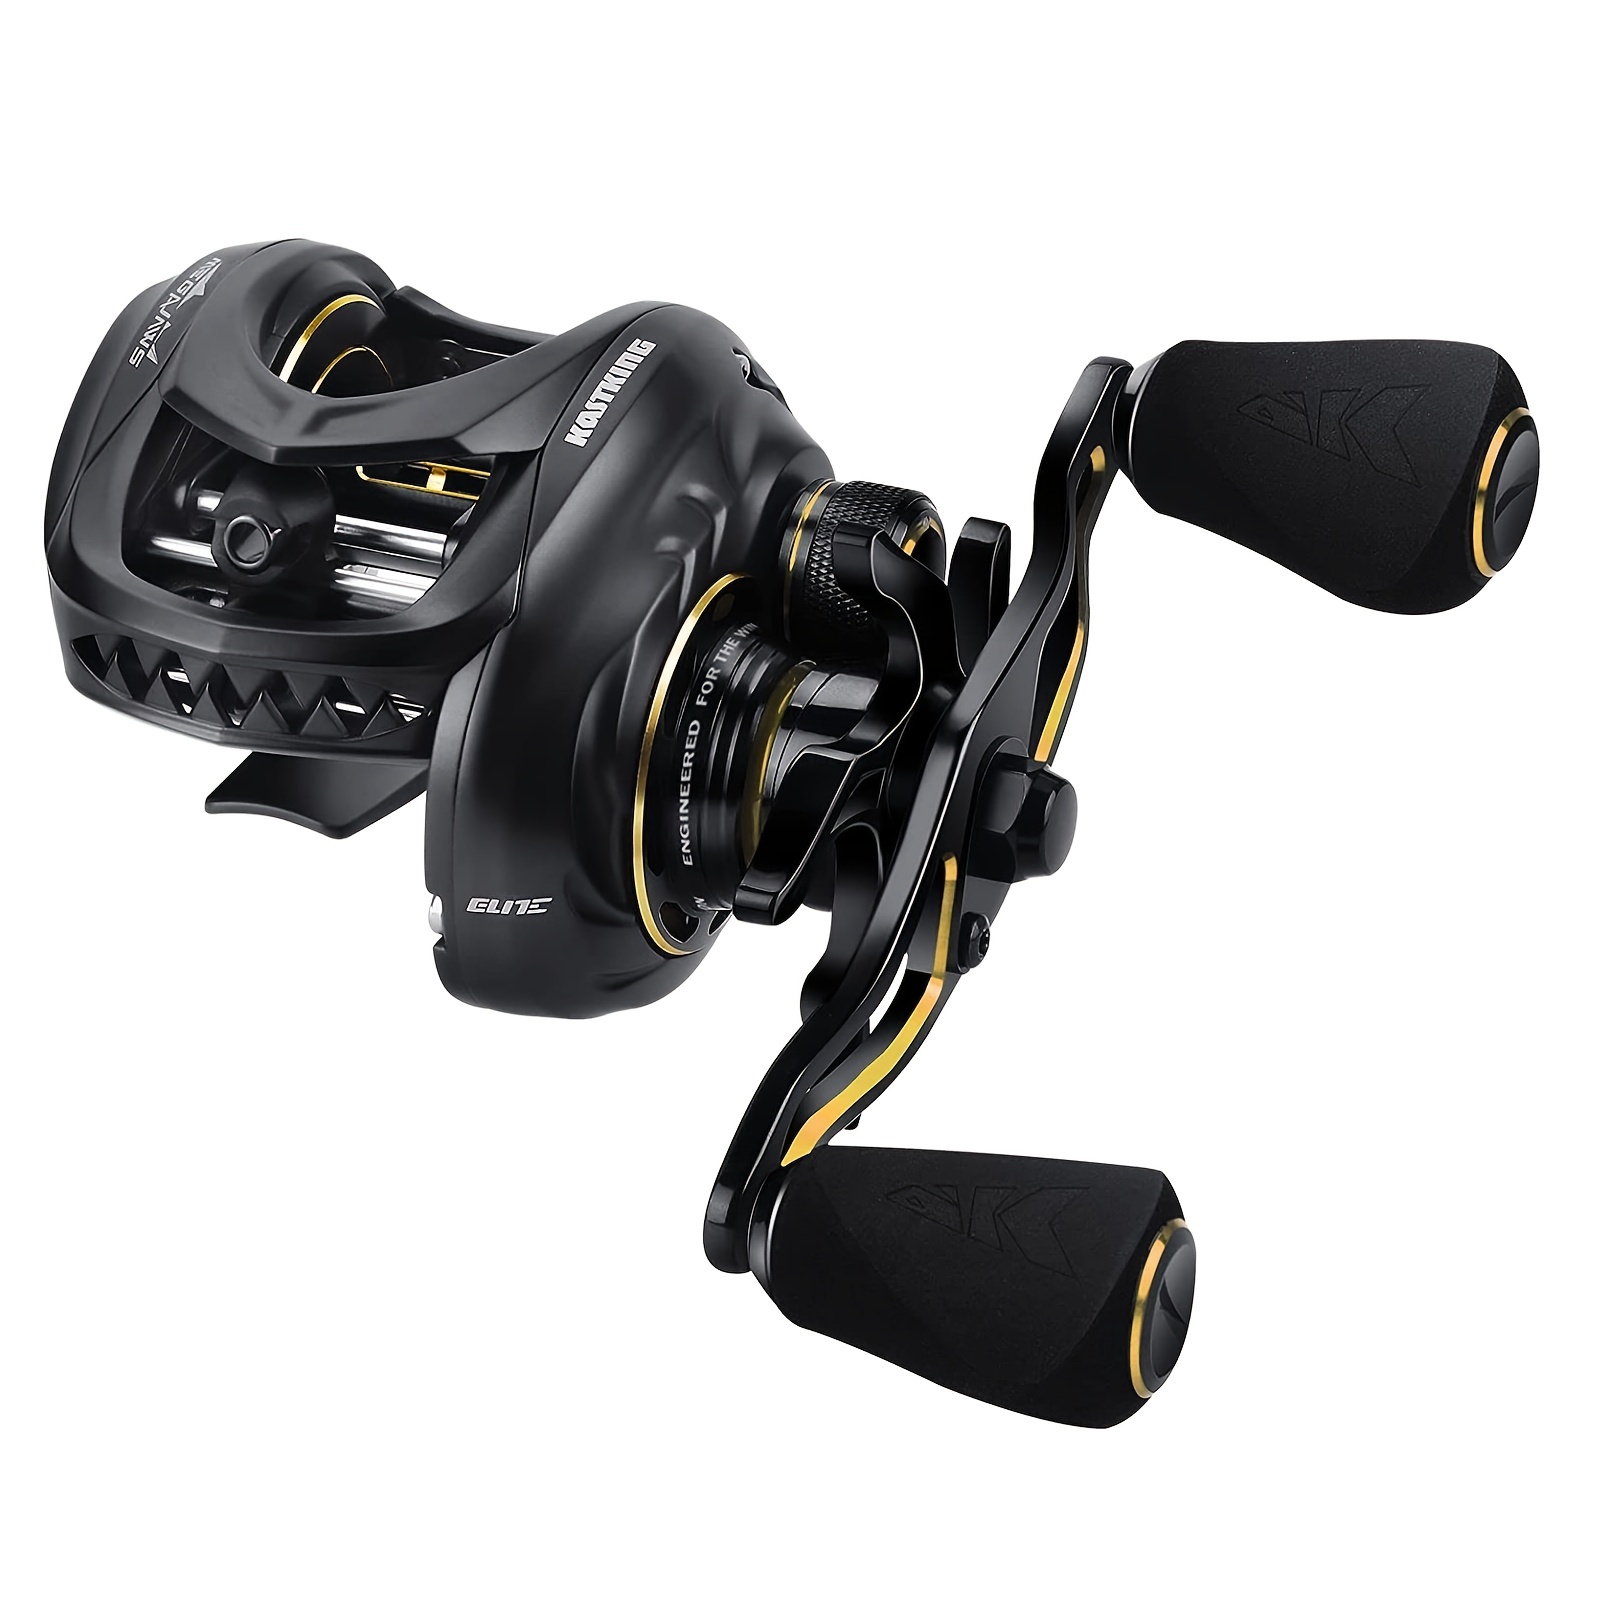 1pc KastKing Megajaws Elite Baitcasting Reel - Patented Amb System,  Flipping Switch Function, Lightweight Aluminum Frame with Carbon Fiber Side  Covers